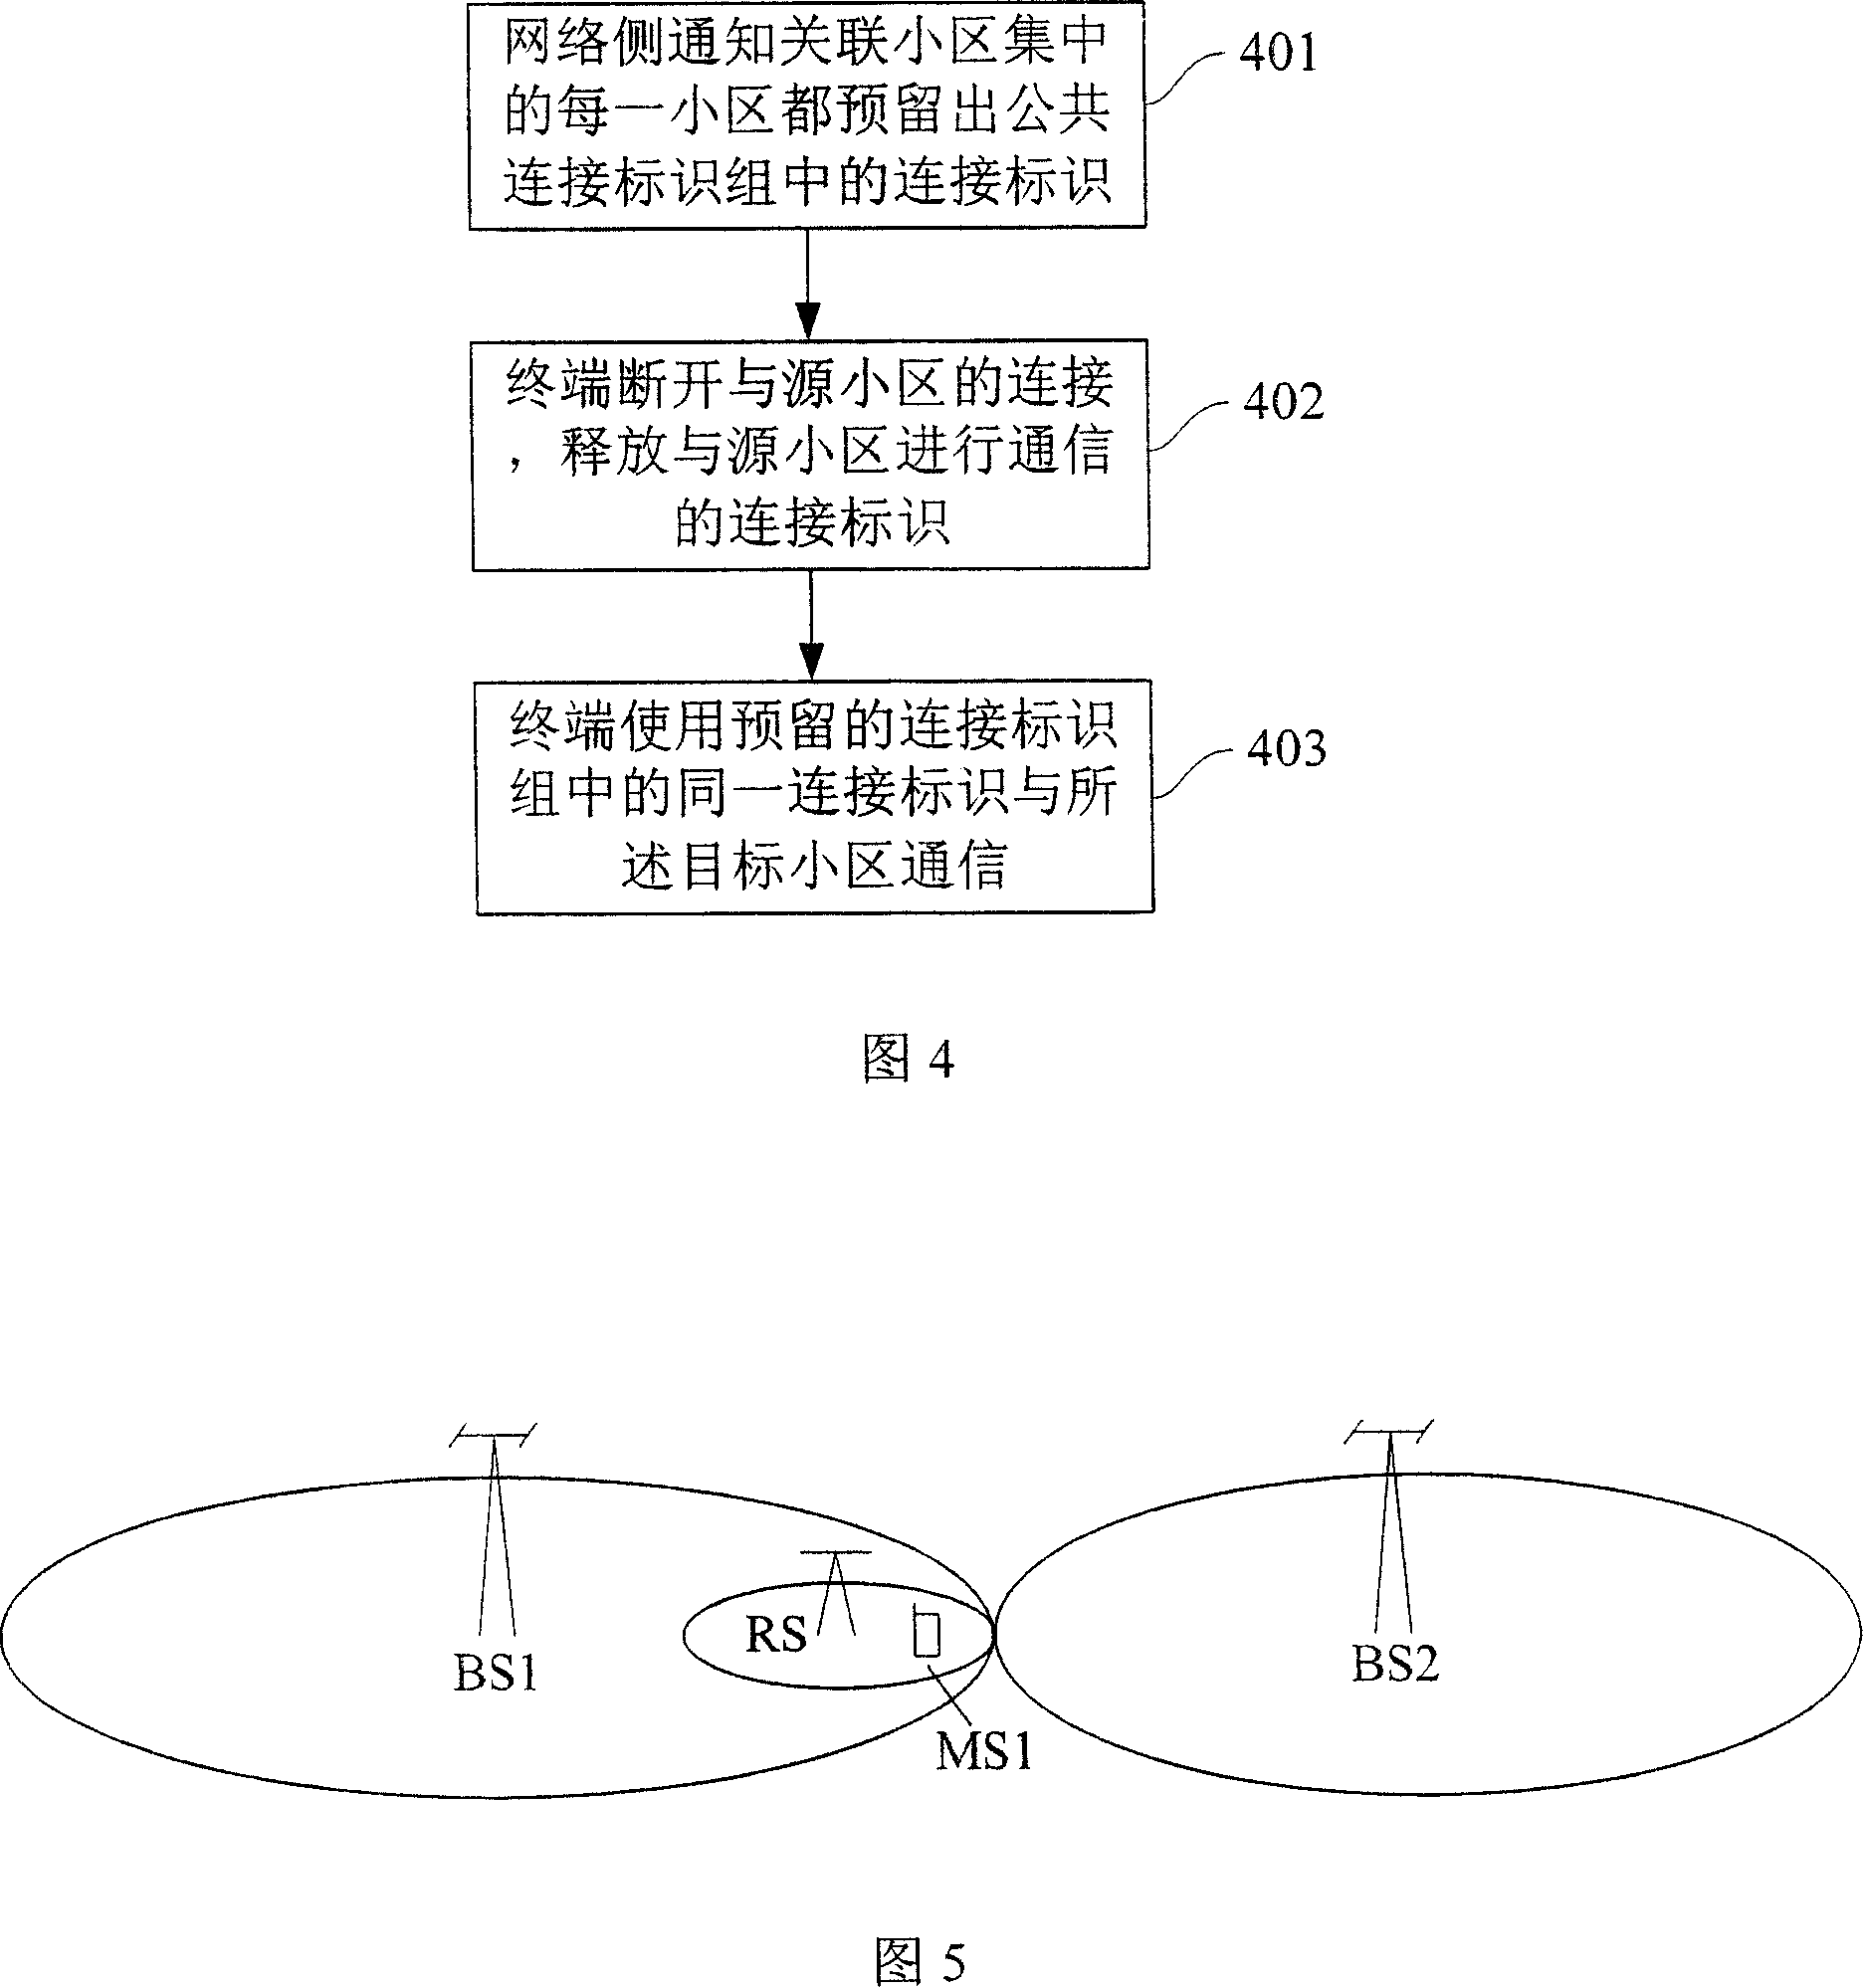 Configuration method of connection identification